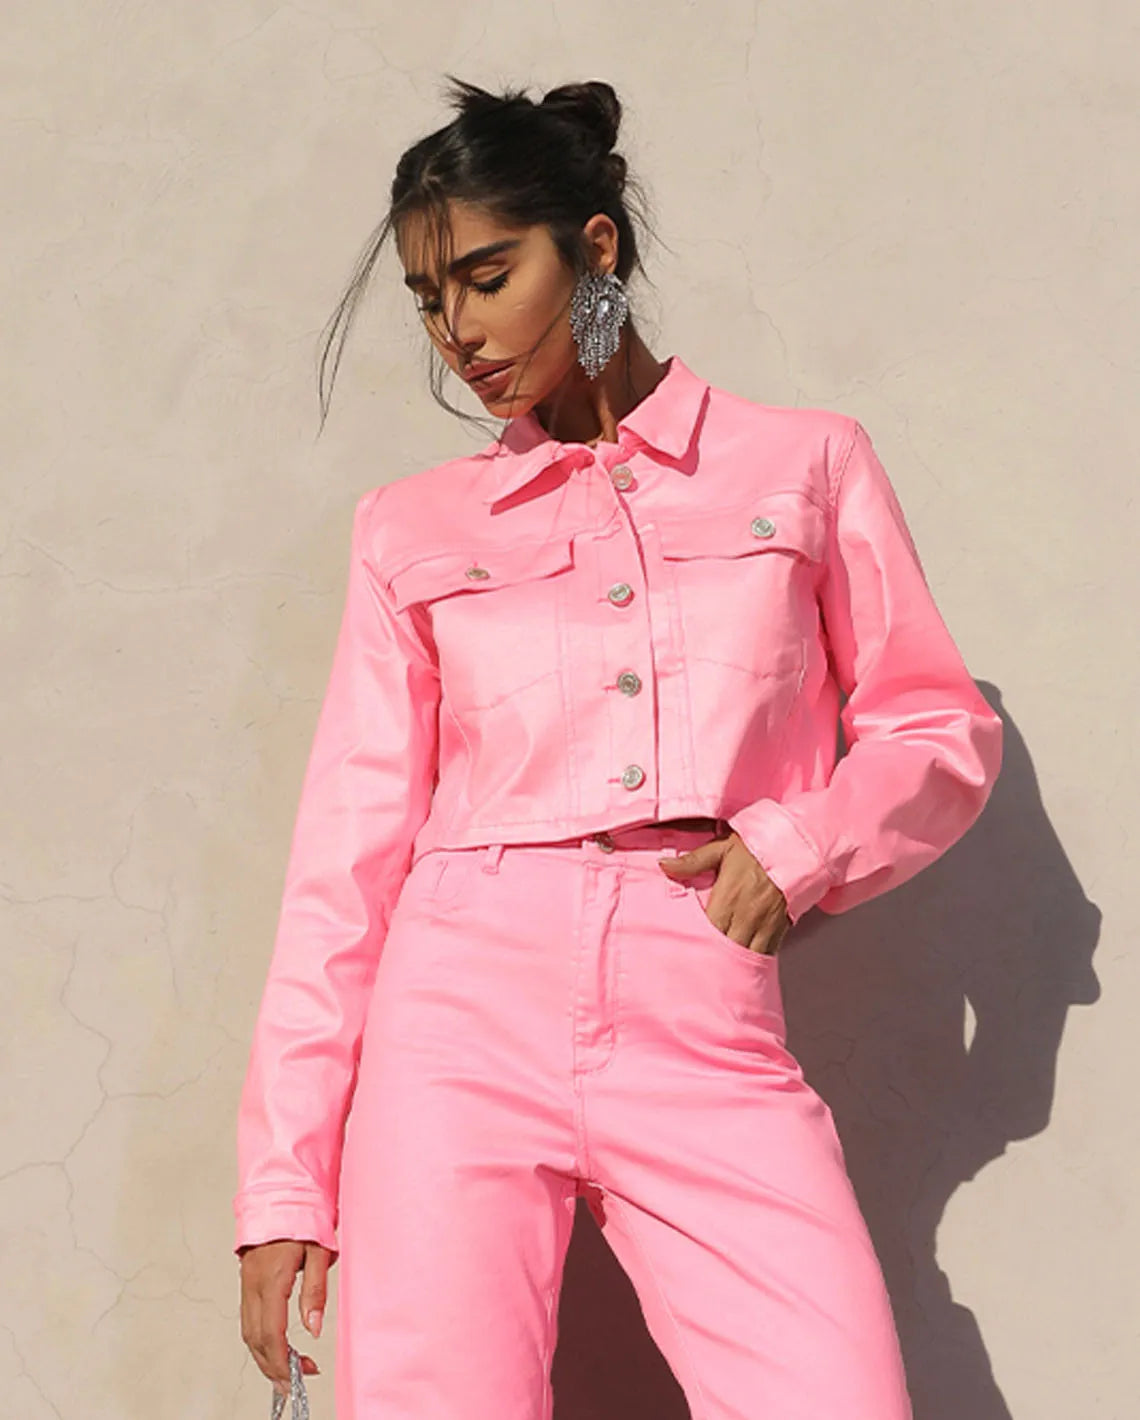 Remy Cropped Jacket, Rose Weave